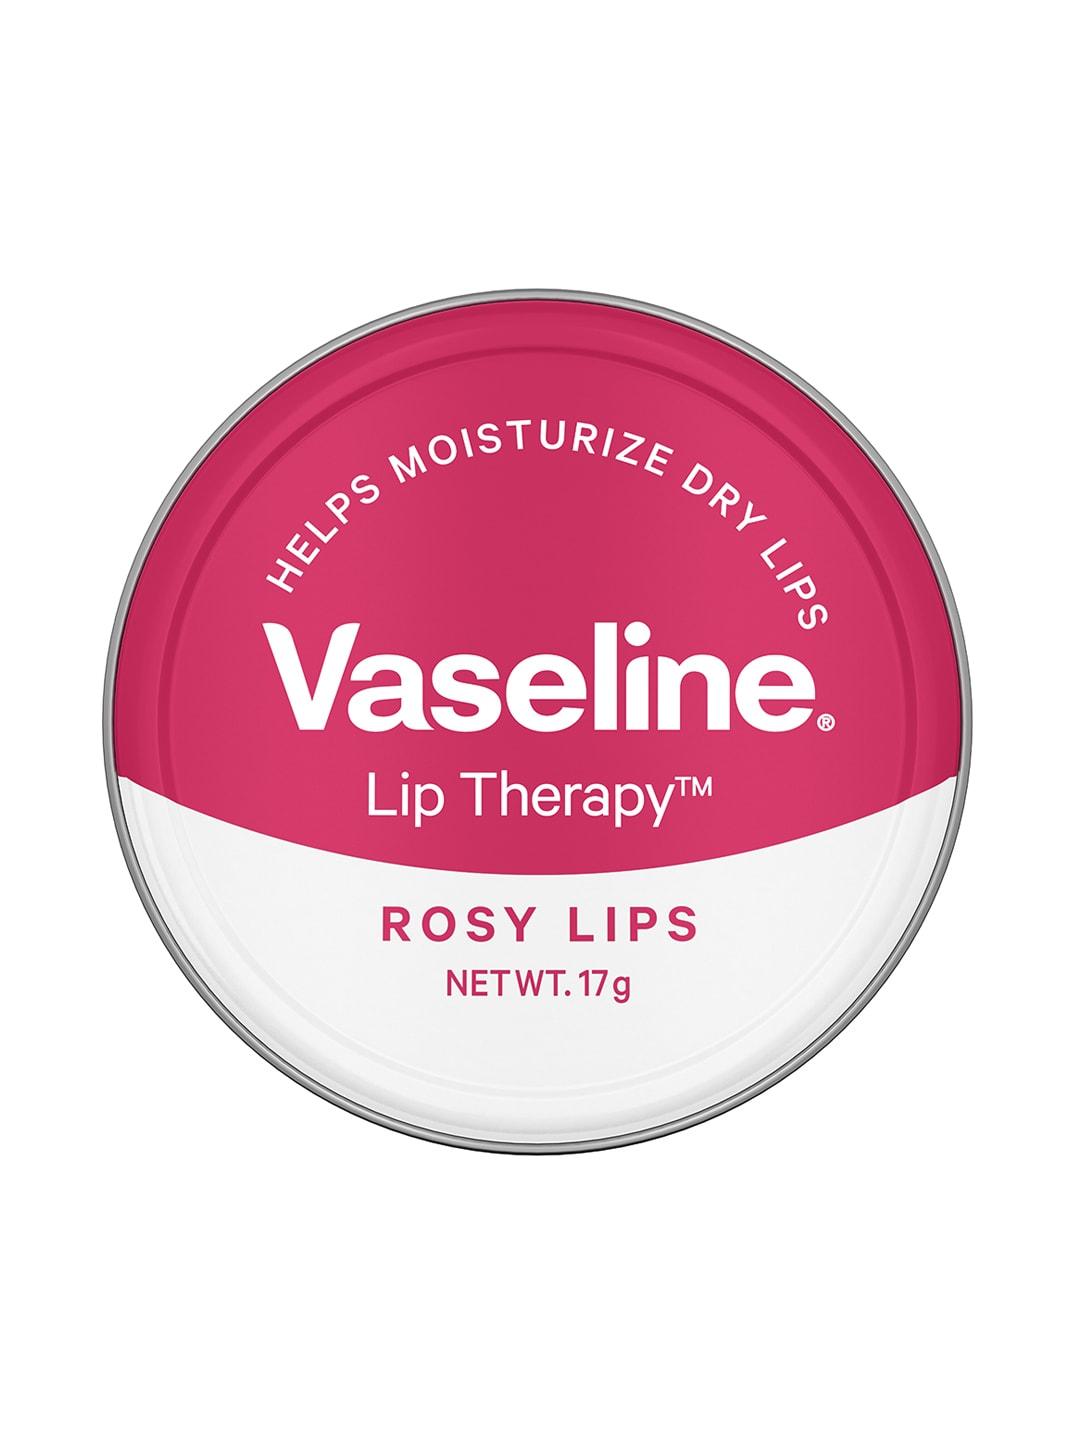 Vaseline Lip Therapy Tins For Moisturised & Soft Lips 17g - Rosy Lips